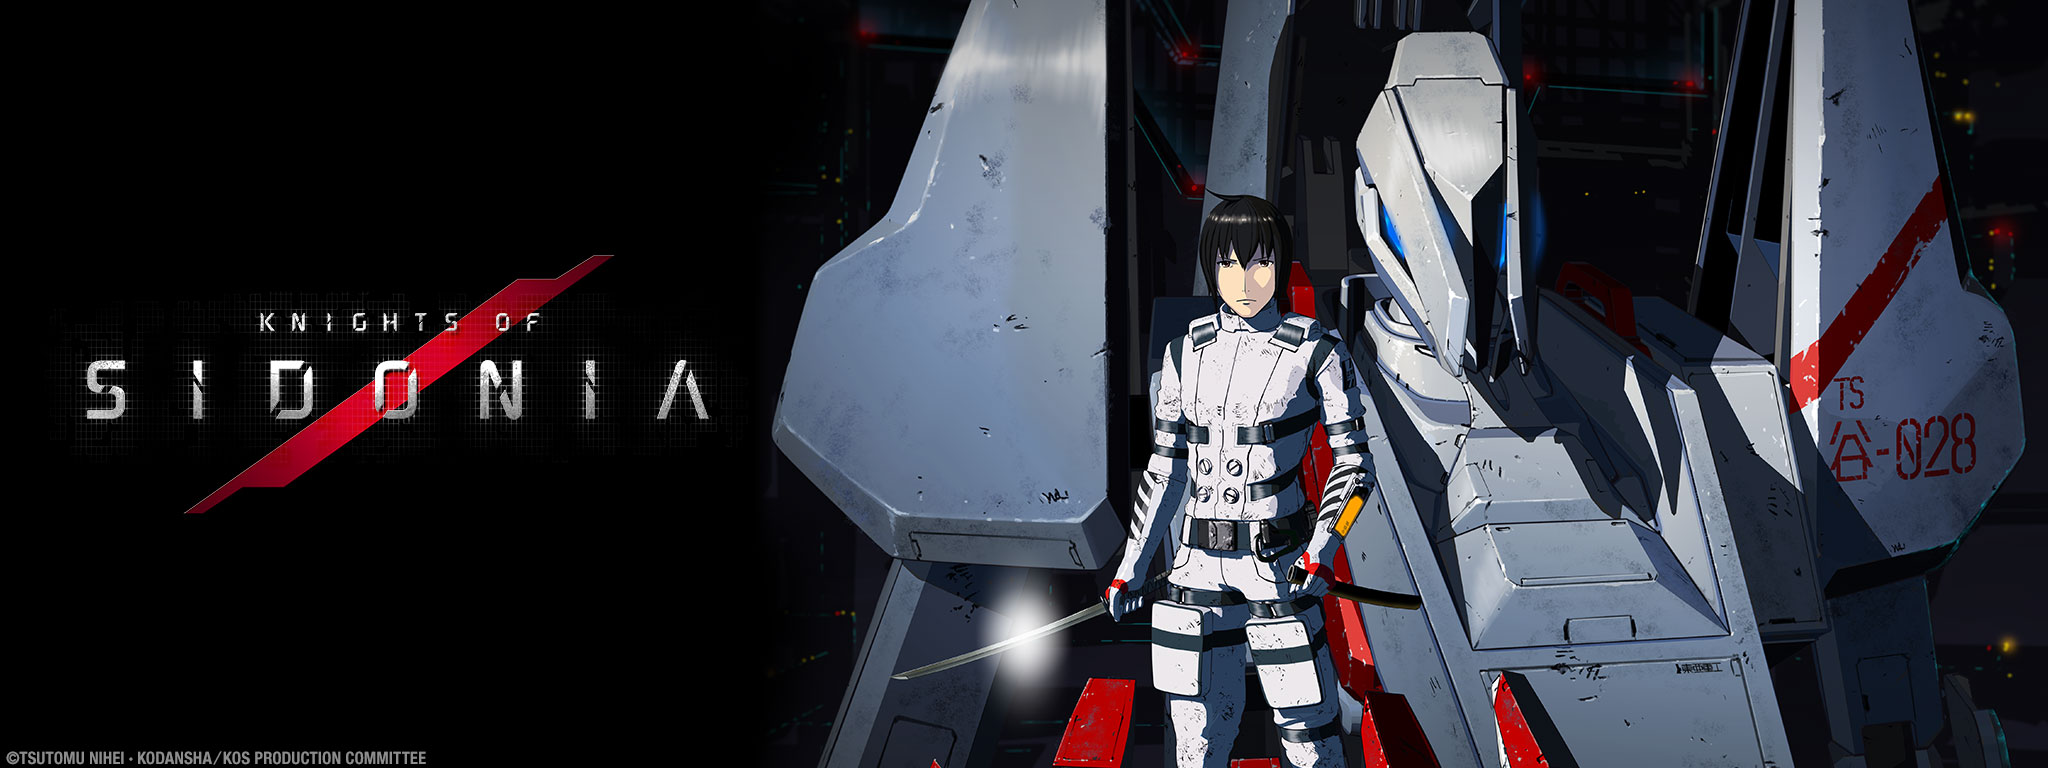 Title Art for Knights of Sidonia